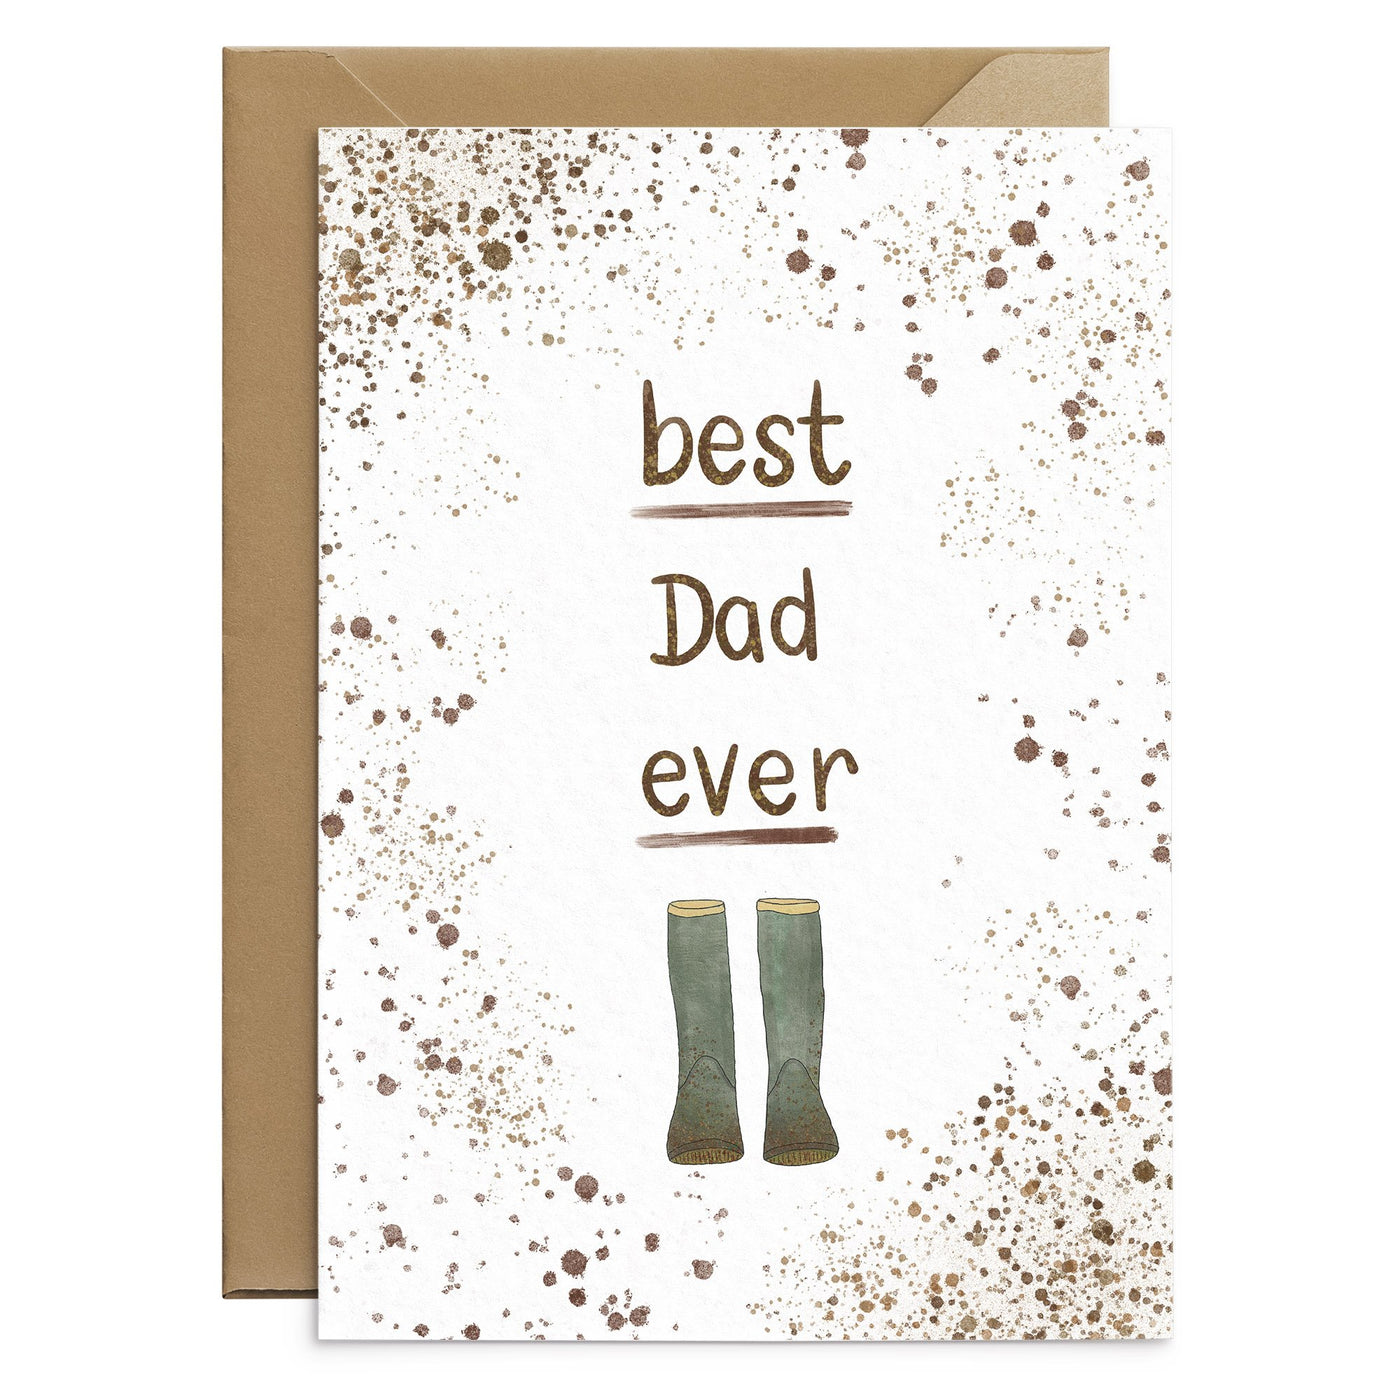 Muddy Wellies - Fathers Day Cards - Poppins & Co.